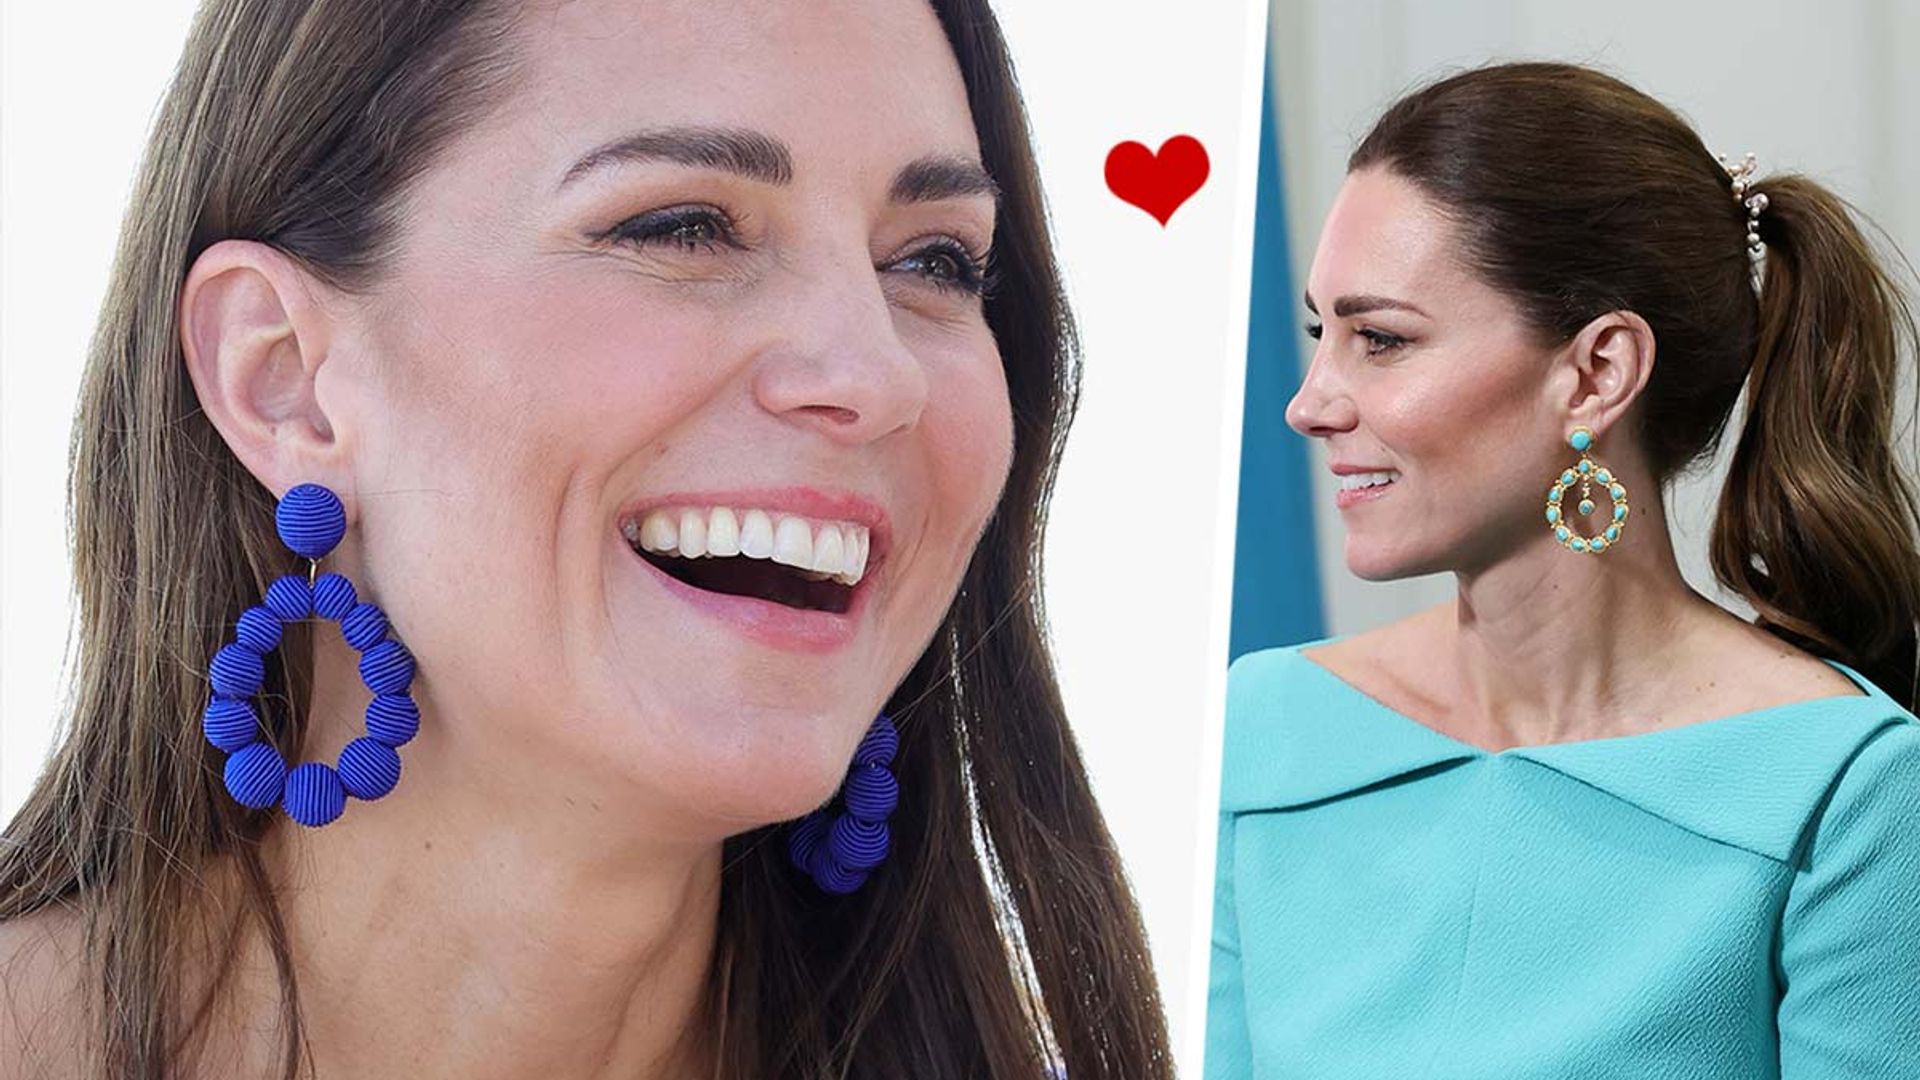 Kate Middleton loves her bright boho beaded earrings - here are 12 pairs to repliKate the look